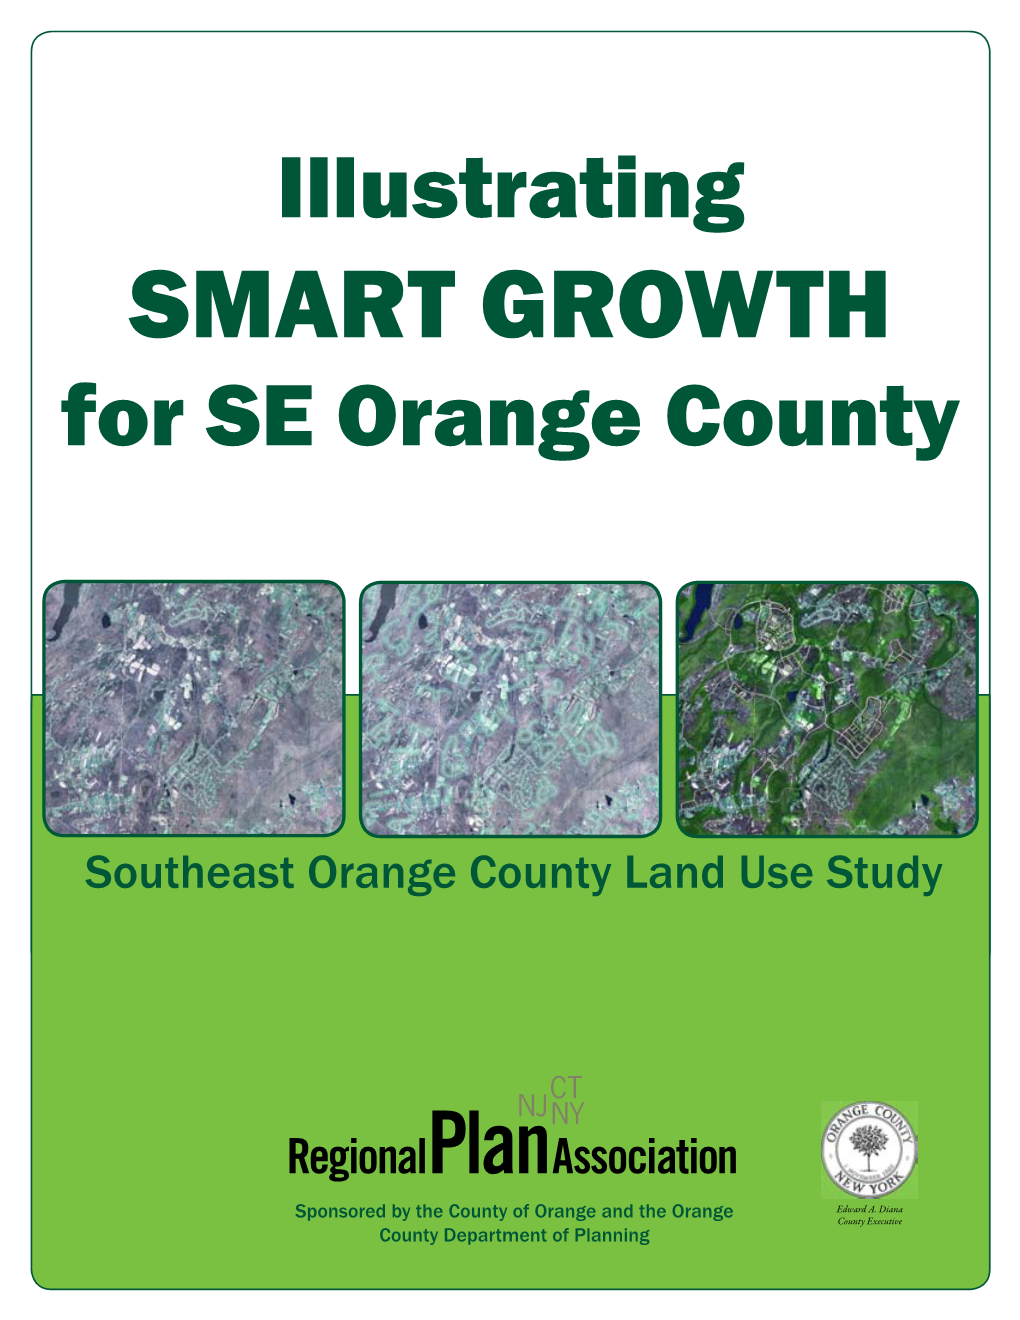 SMART GROWTH for SE Orange County